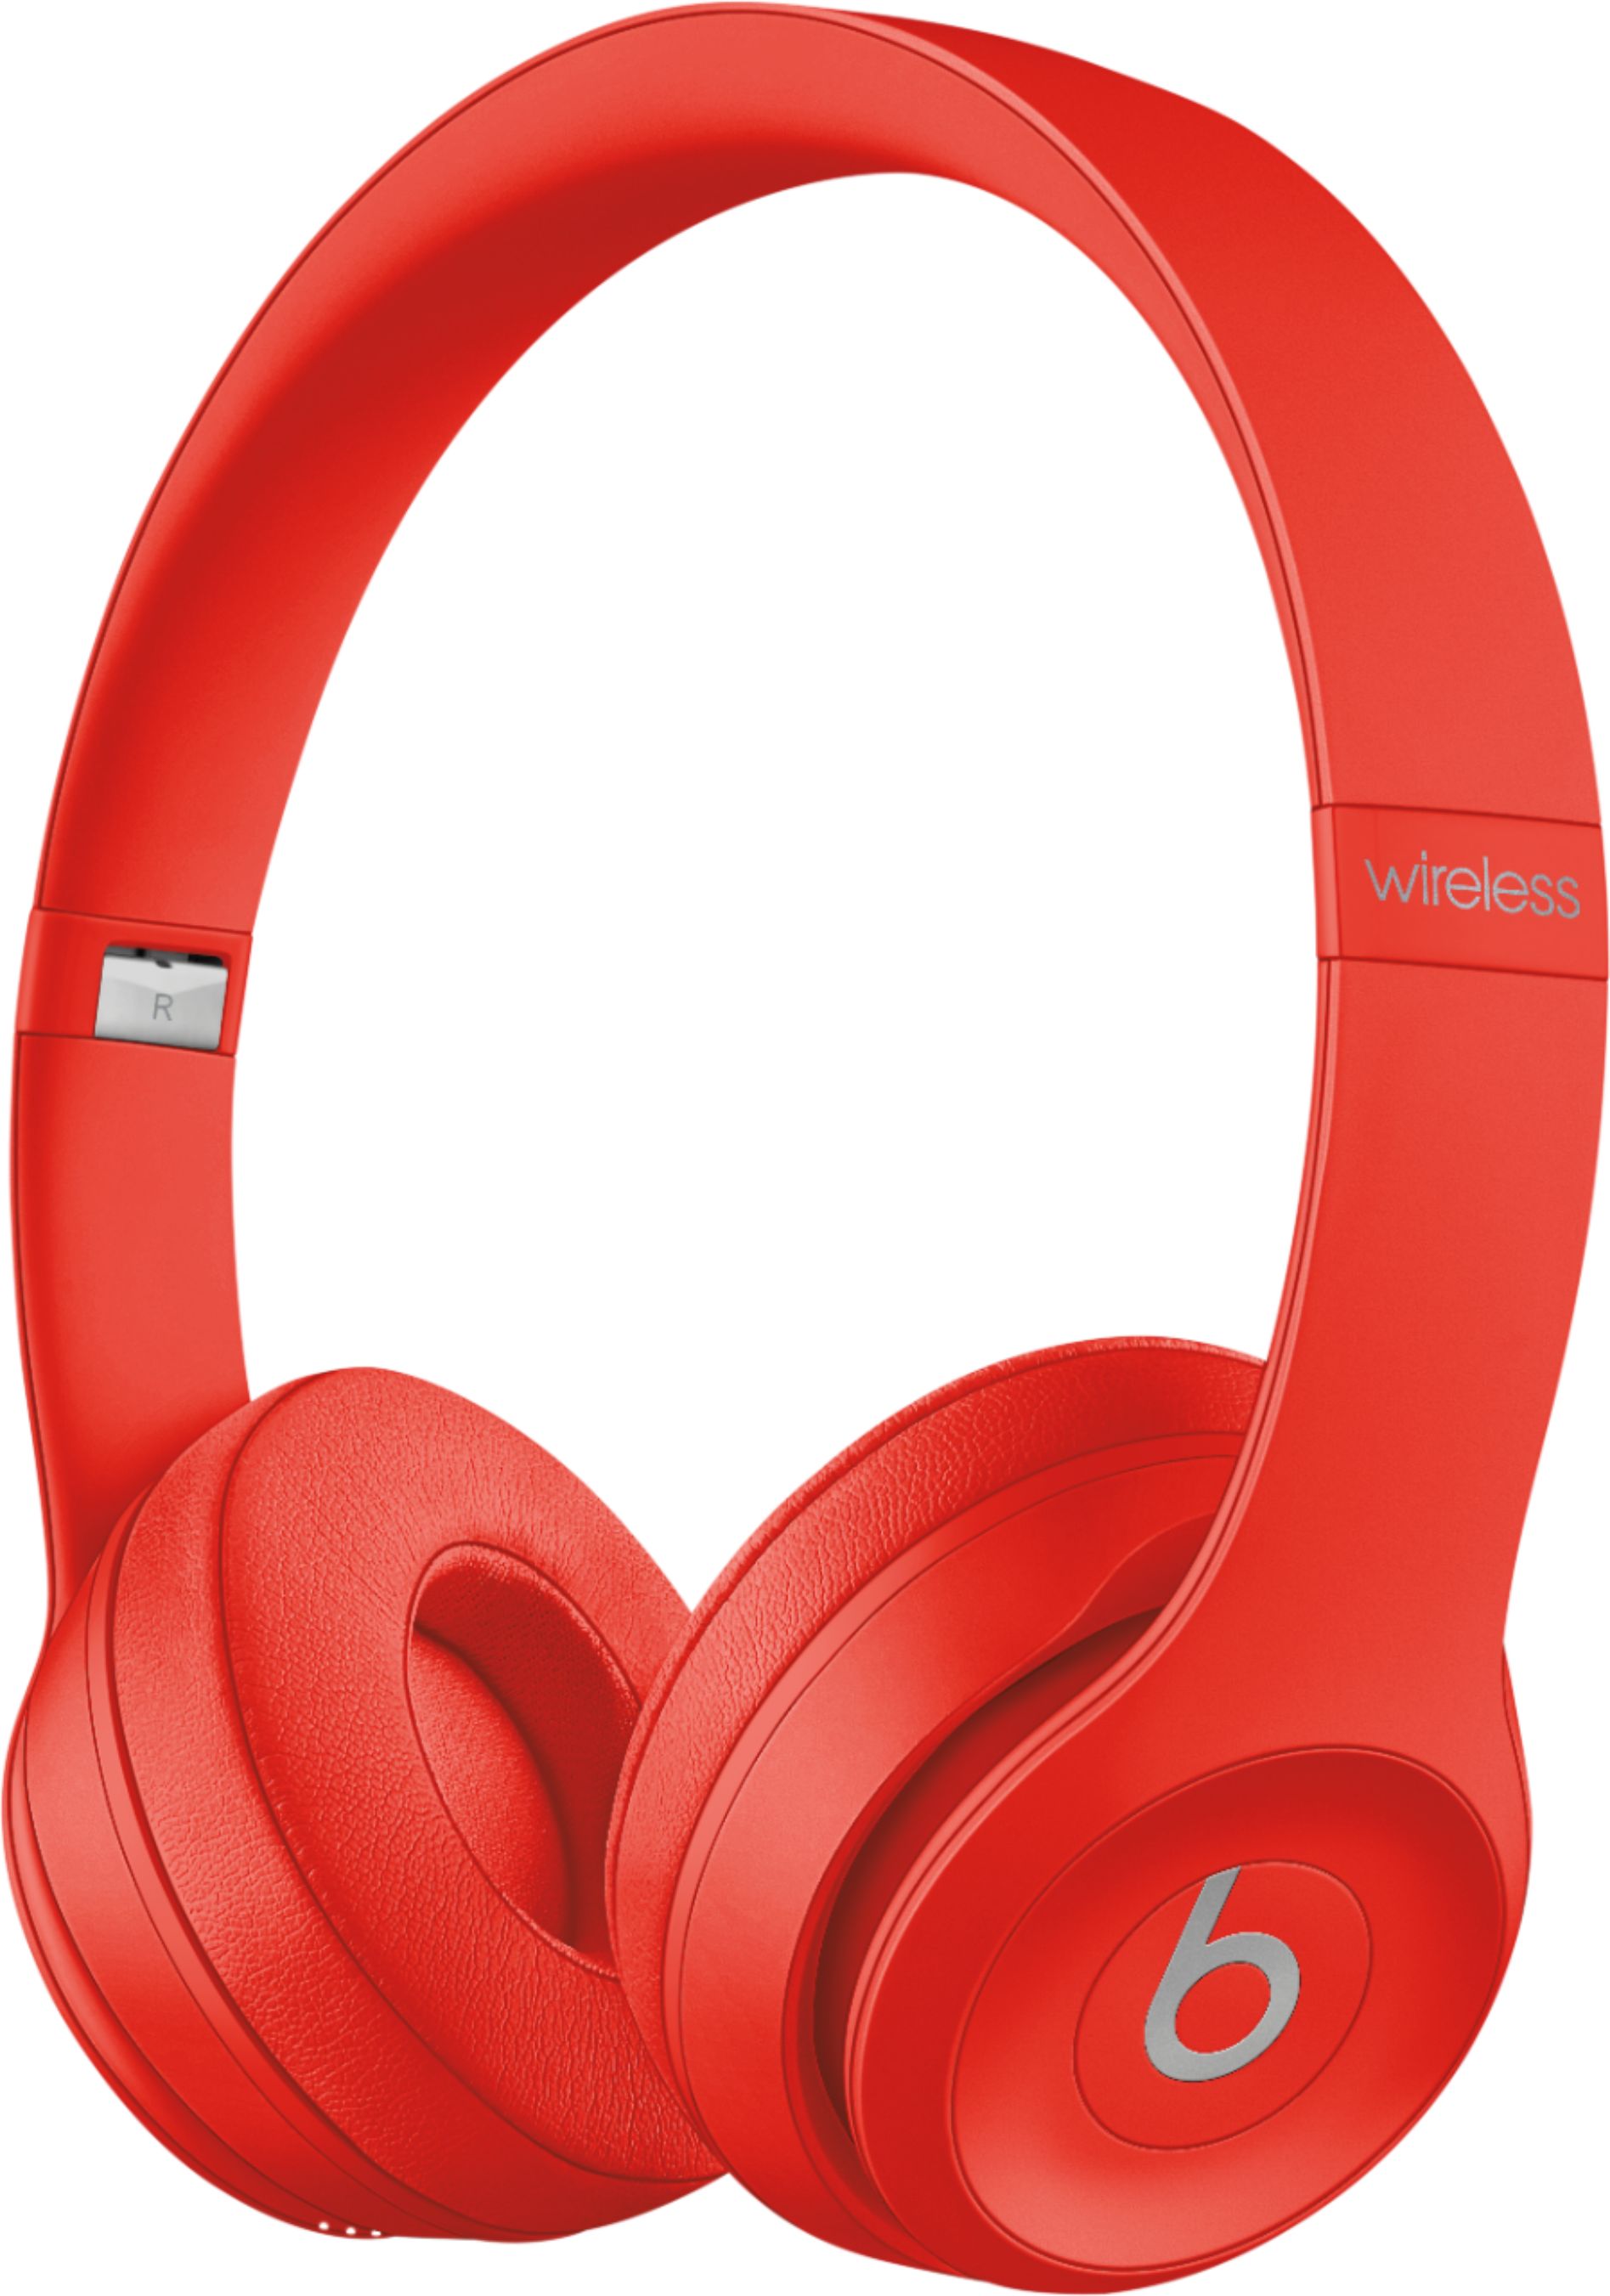 beats by dre headphones black and red